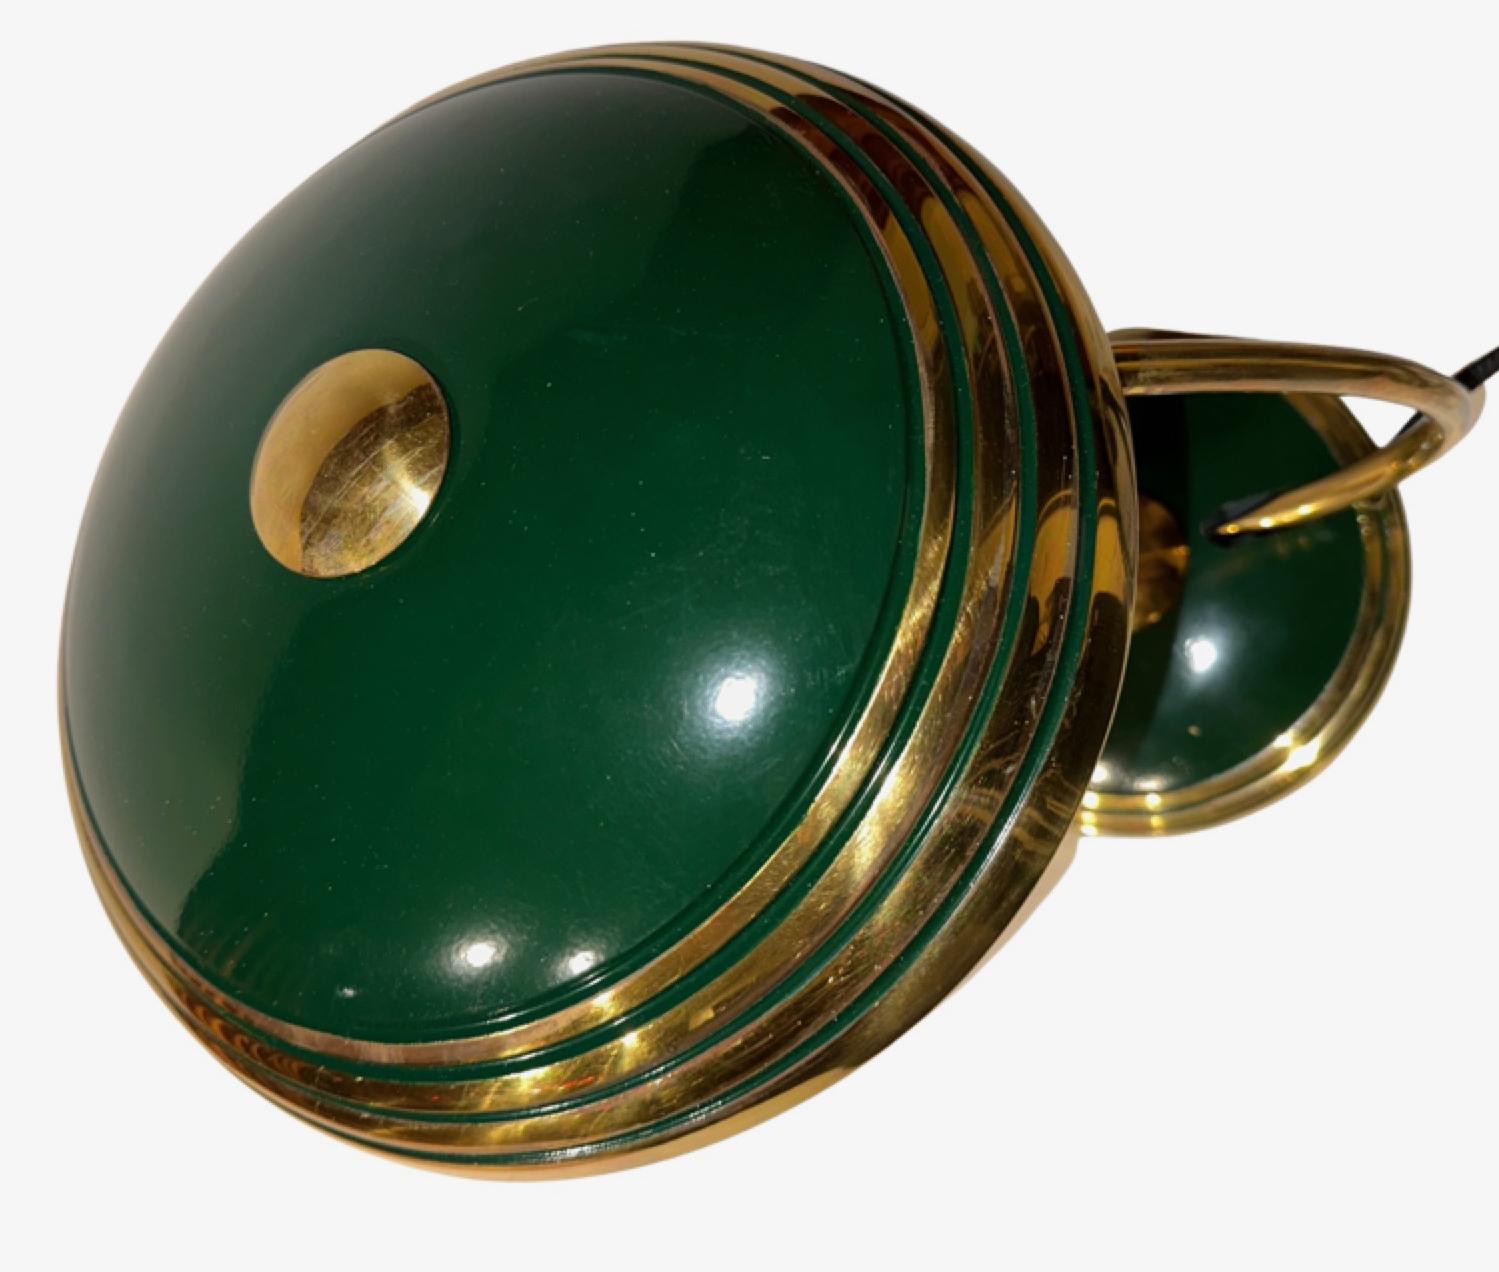 Modernist Art Deco Enamel Green and Brass Table Lamp In Good Condition For Sale In Oakland, CA